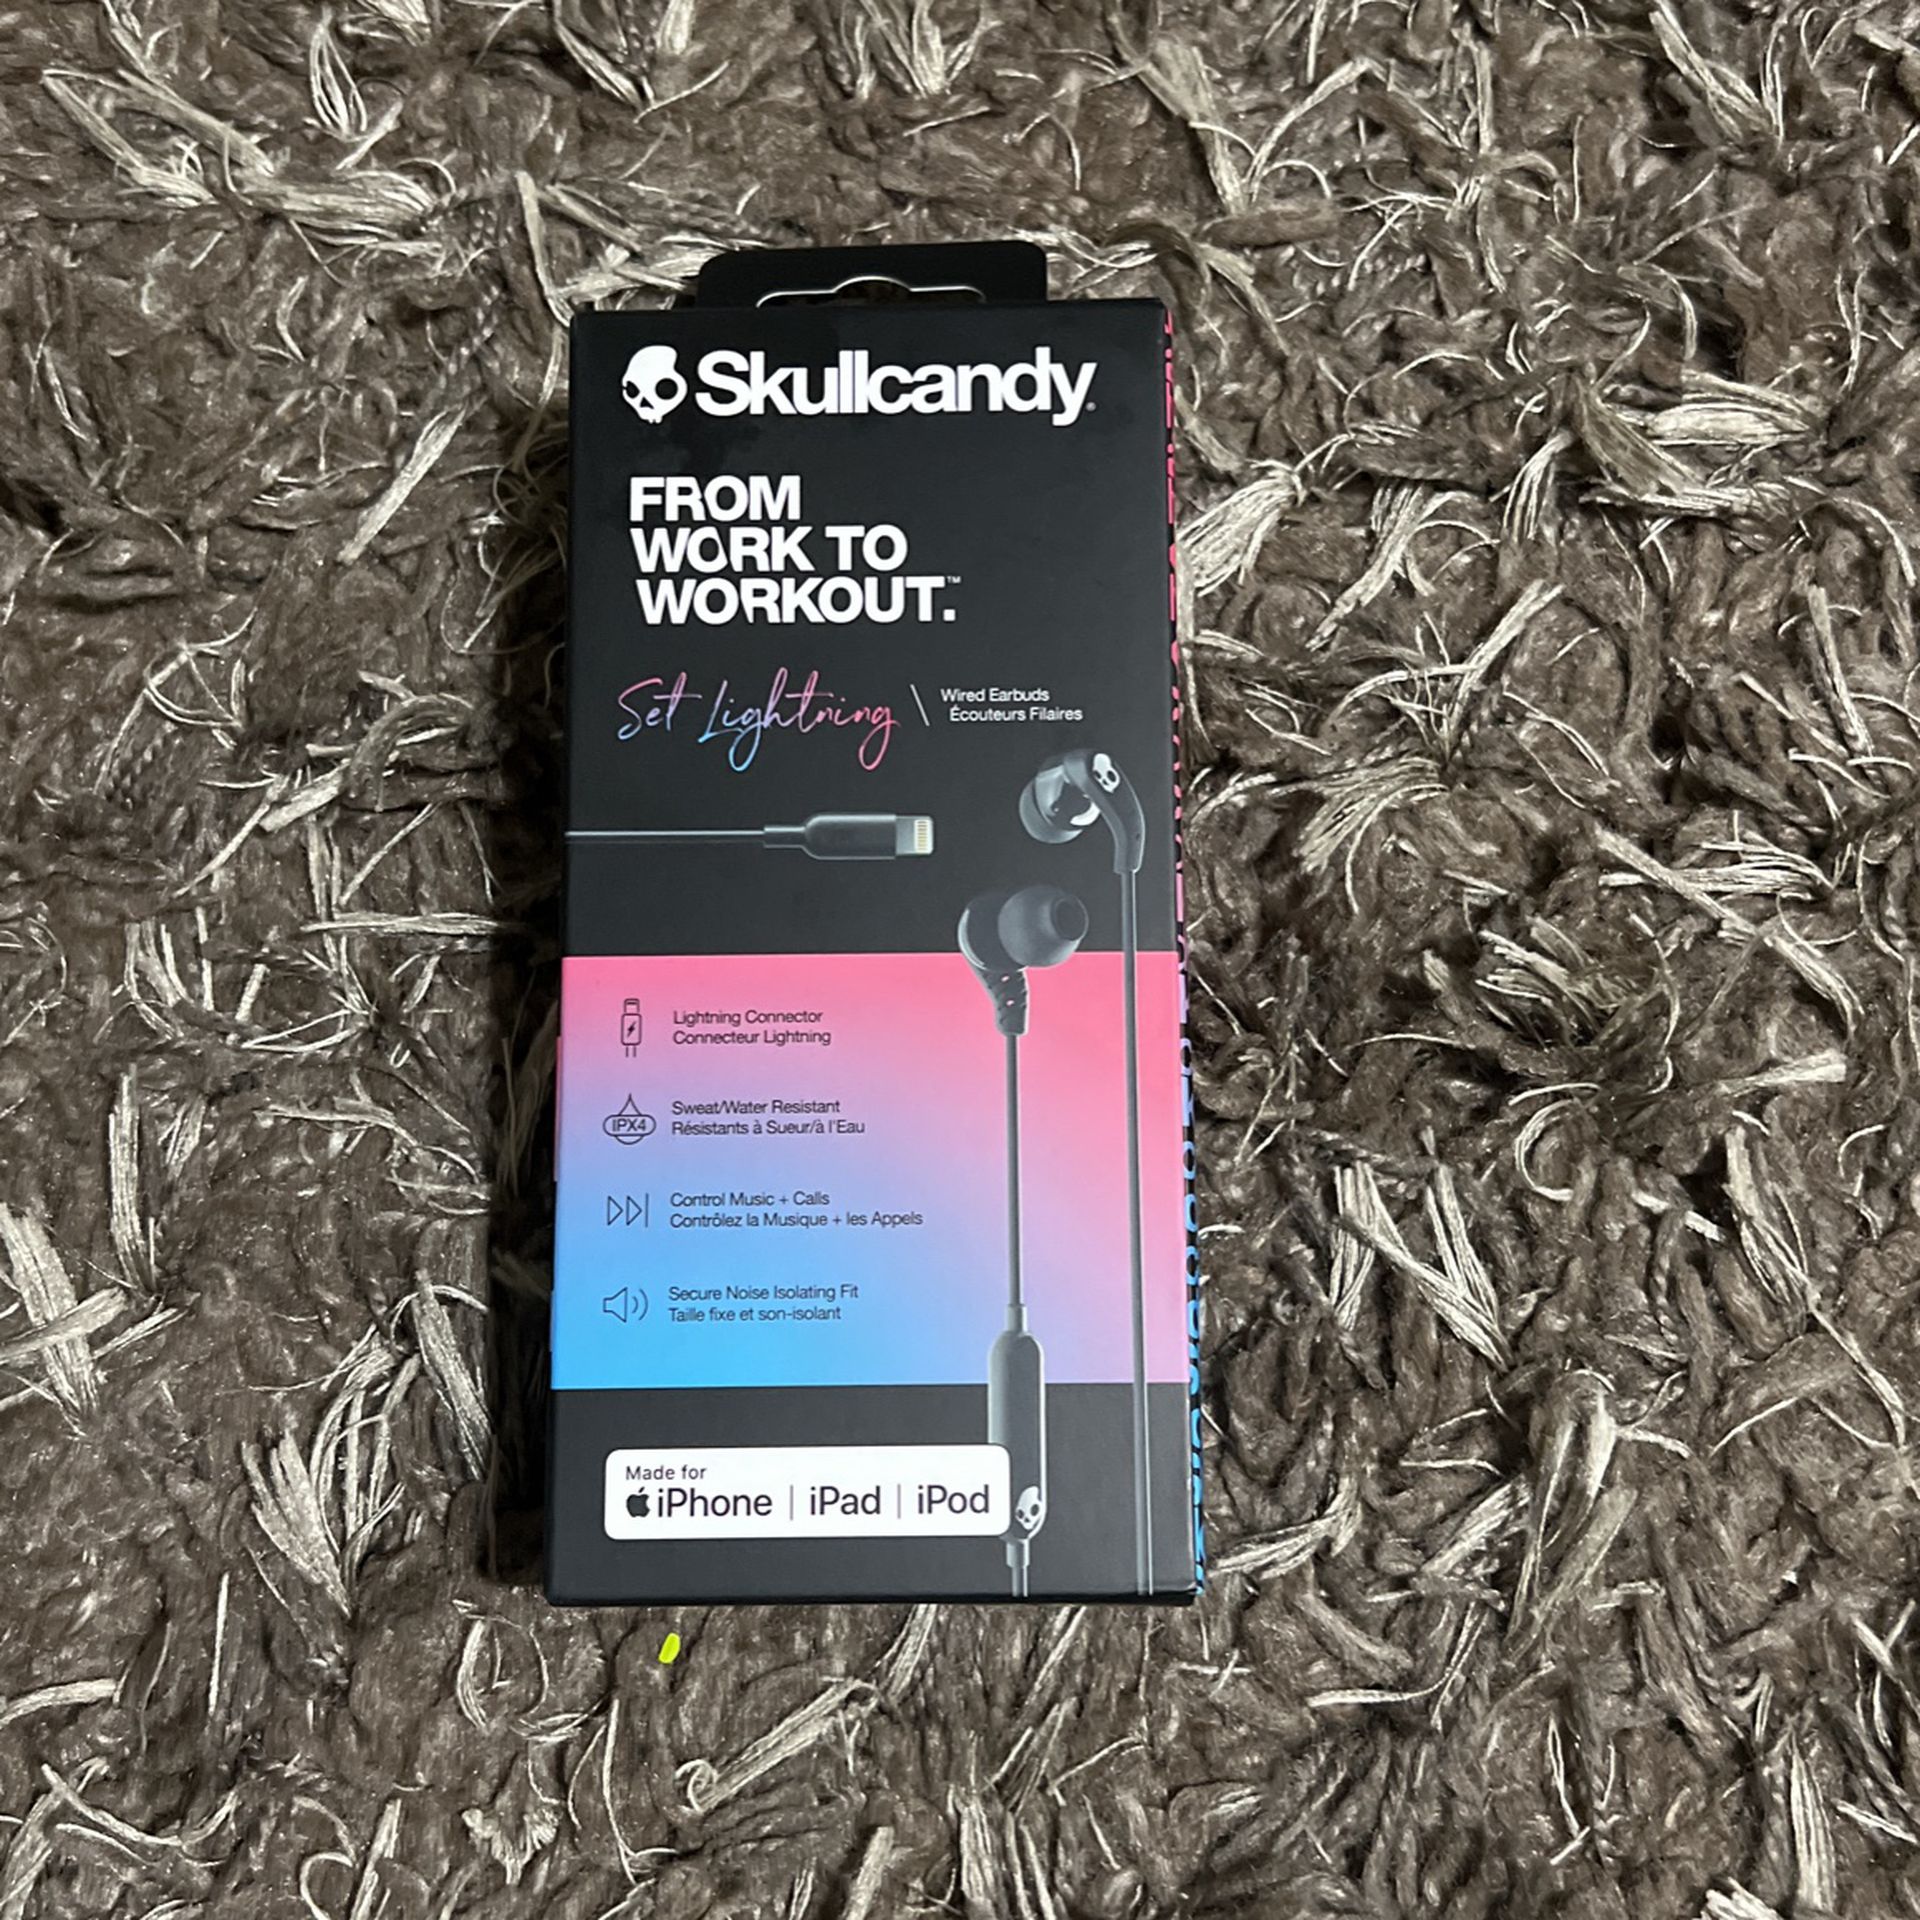 Skullcandy Set Lightning Wired Earbuds for iPhone, iPad & iPod -